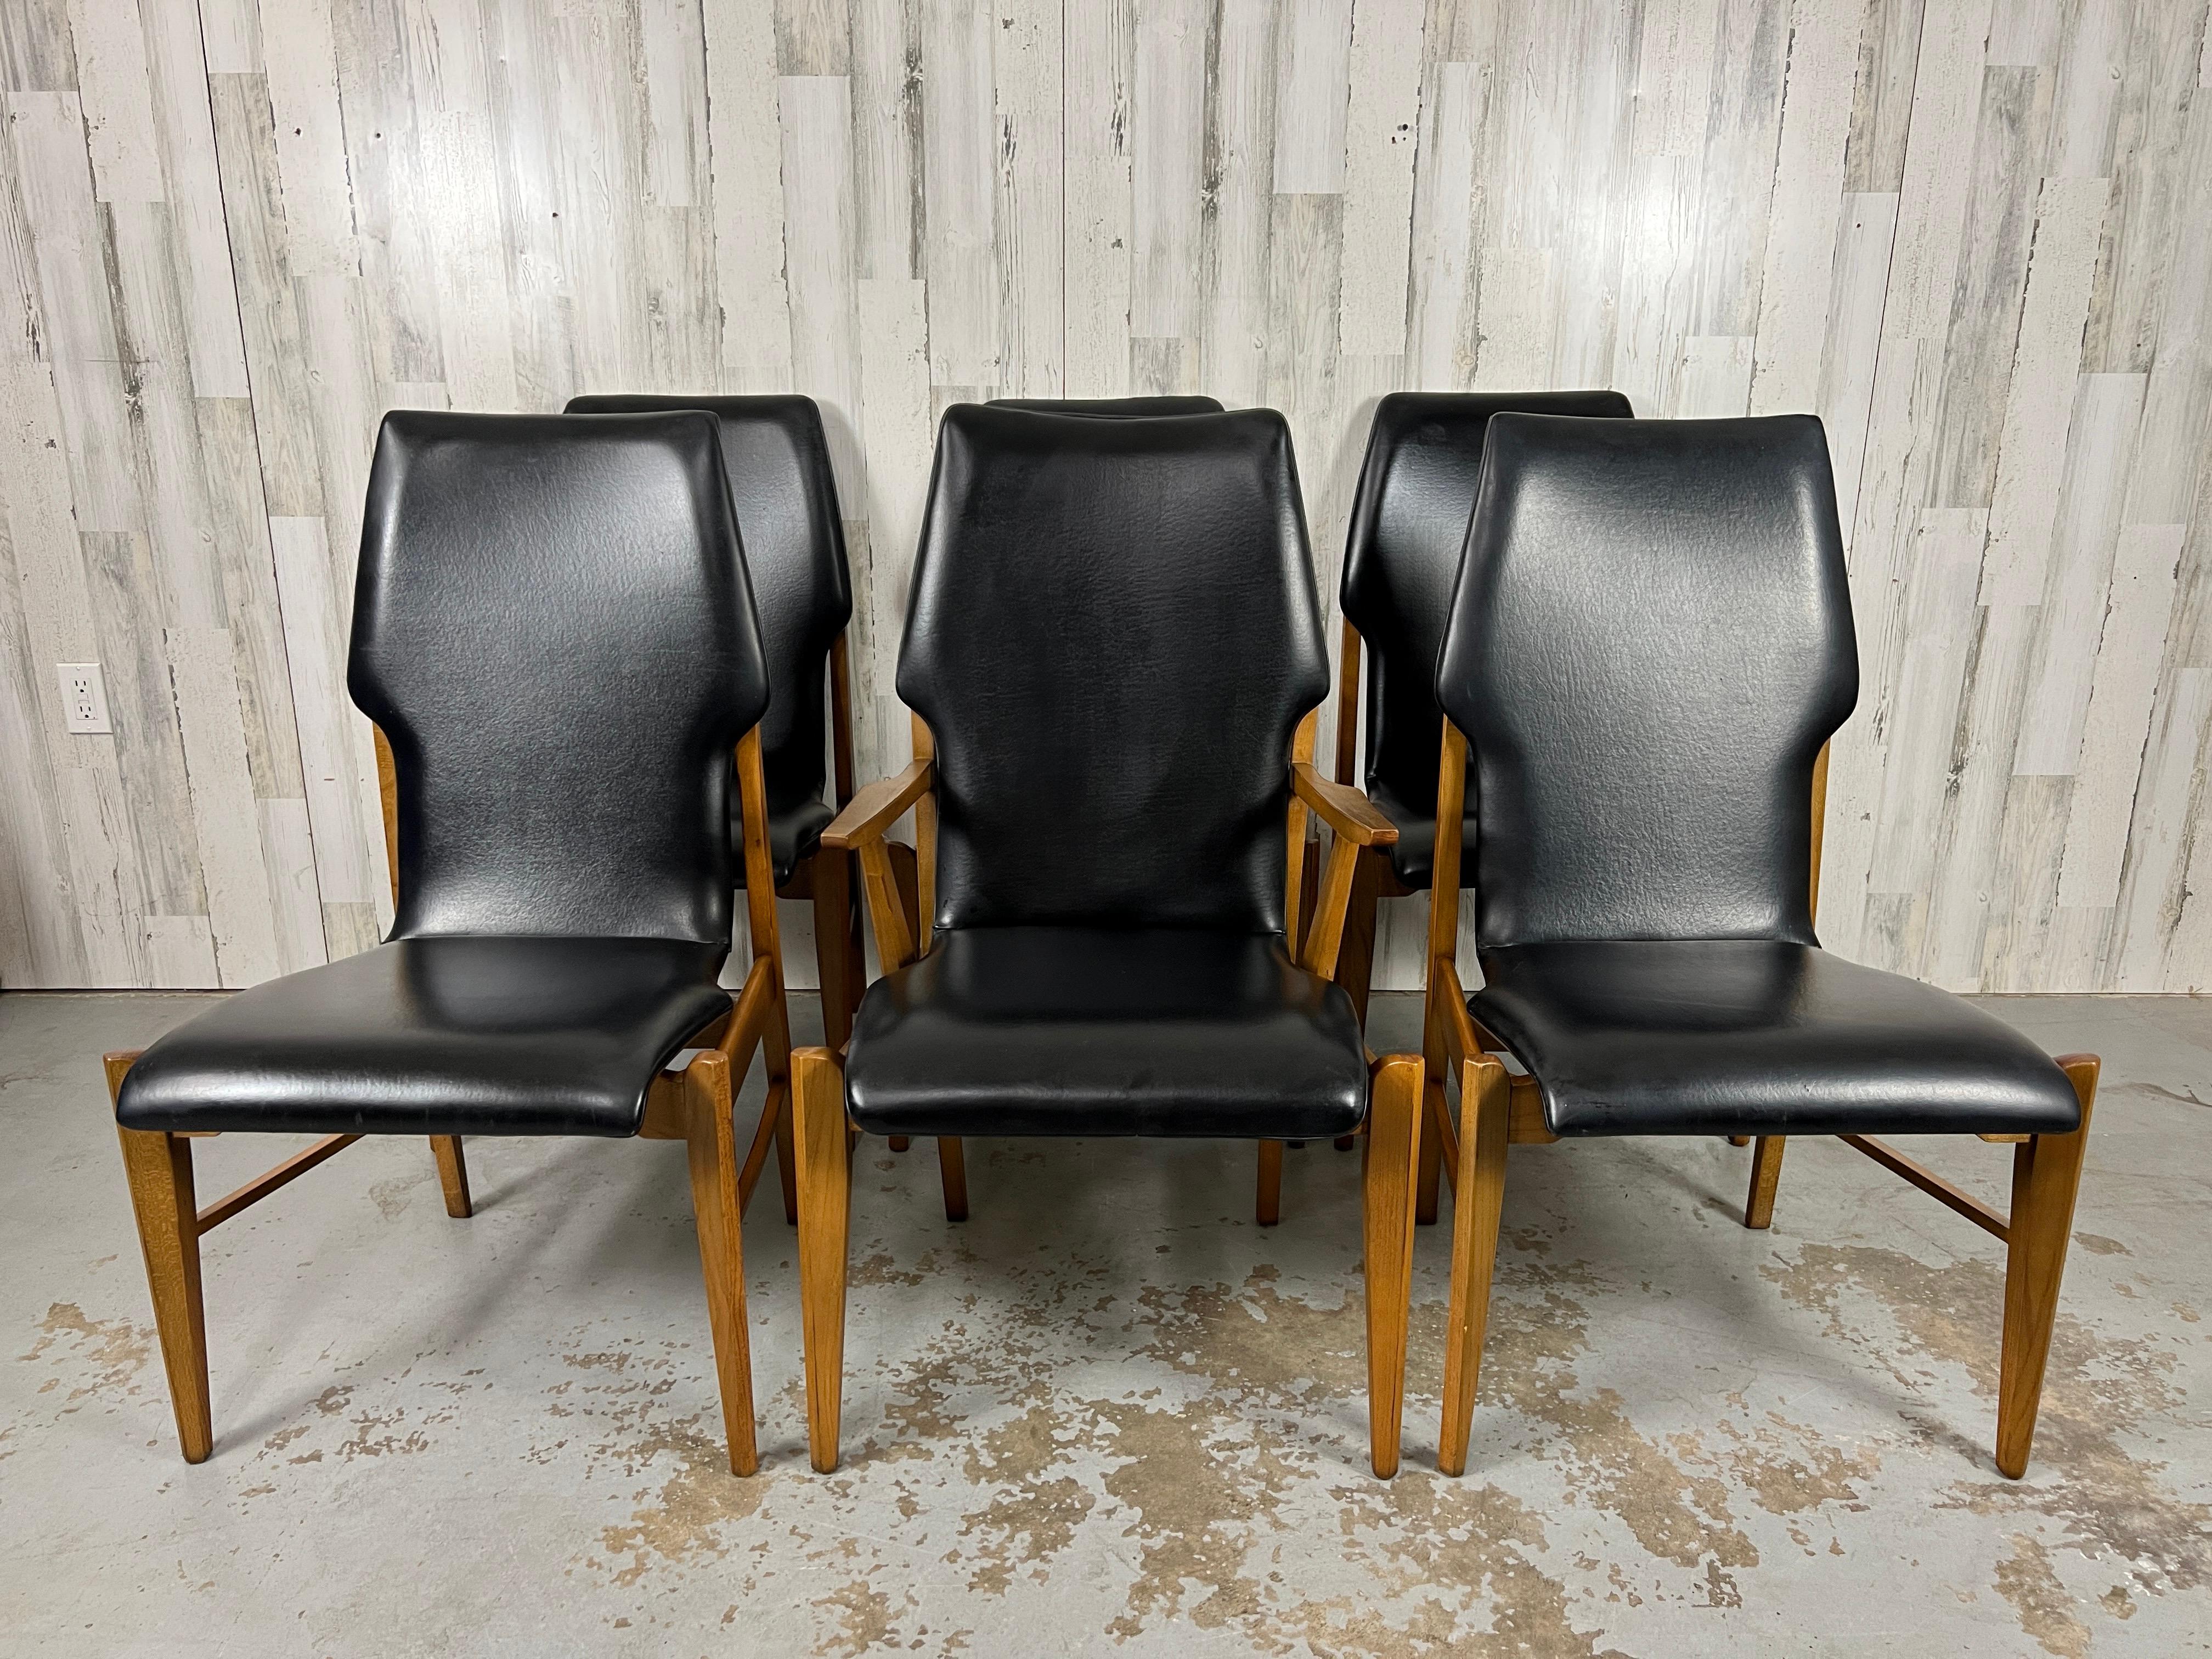 One arm chair and five side chairs complete this set of six . Bent walnut plywood with architechual wood frames. This set retains its original black vinyl cushions Made by Lane furniture company. 

Arm Chair measures 24 deep 22 5/8 wide 38.5 height